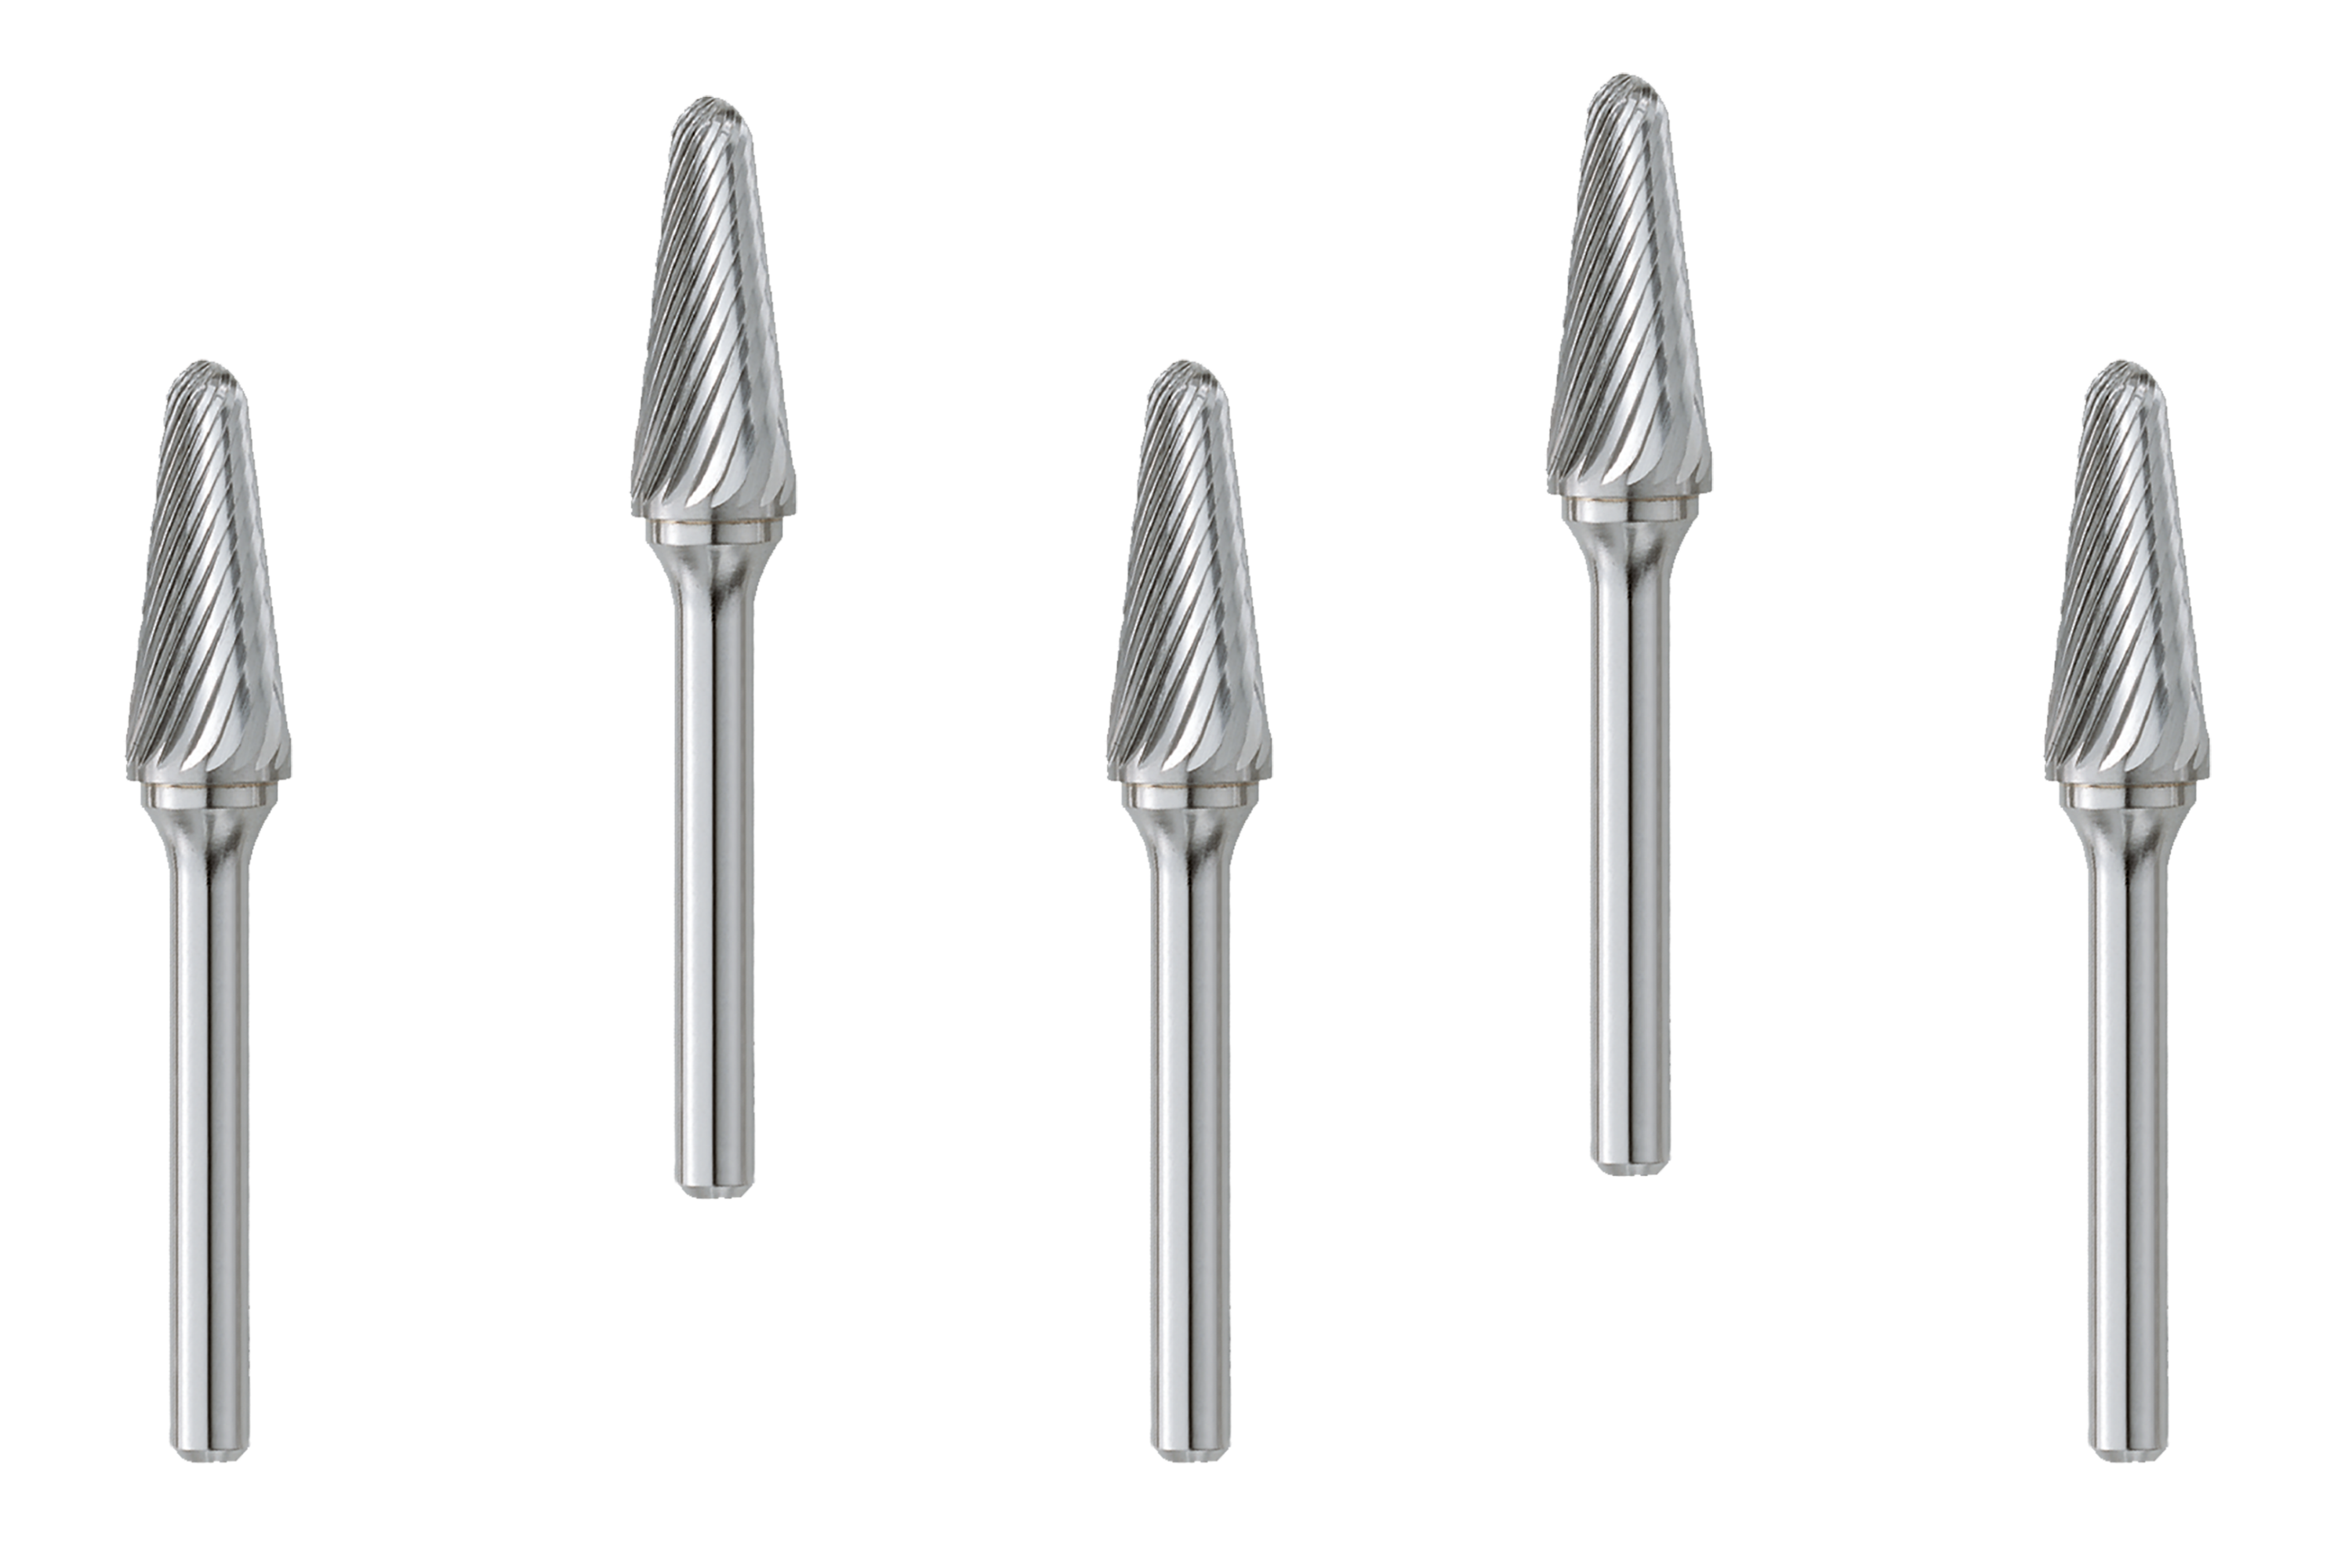 SL-6 14° Burr (5 Pack) 5/8" x 1-5/16" Cut Length x 2-3/8" OAL on 1/4" Shanks - The End Mill Store 